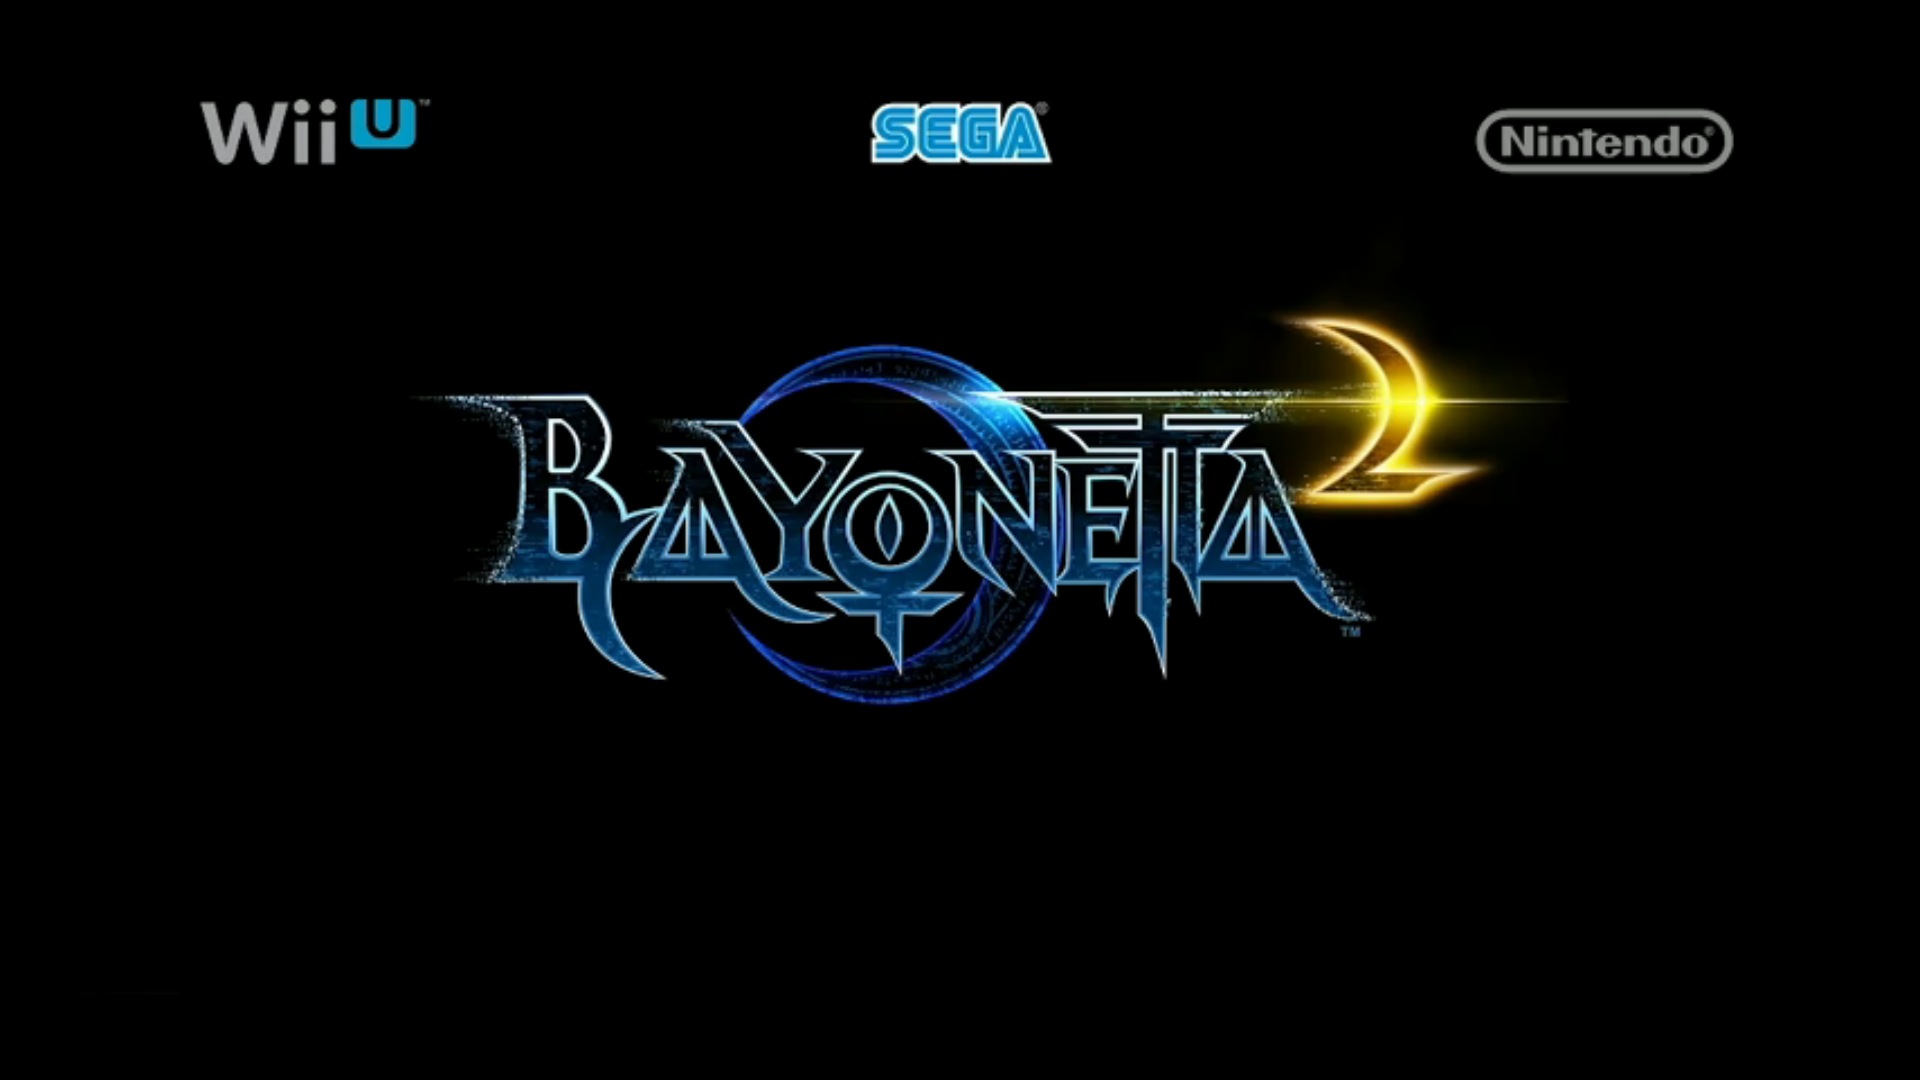 Bayonetta 2 Demo Now Available in US and Europe